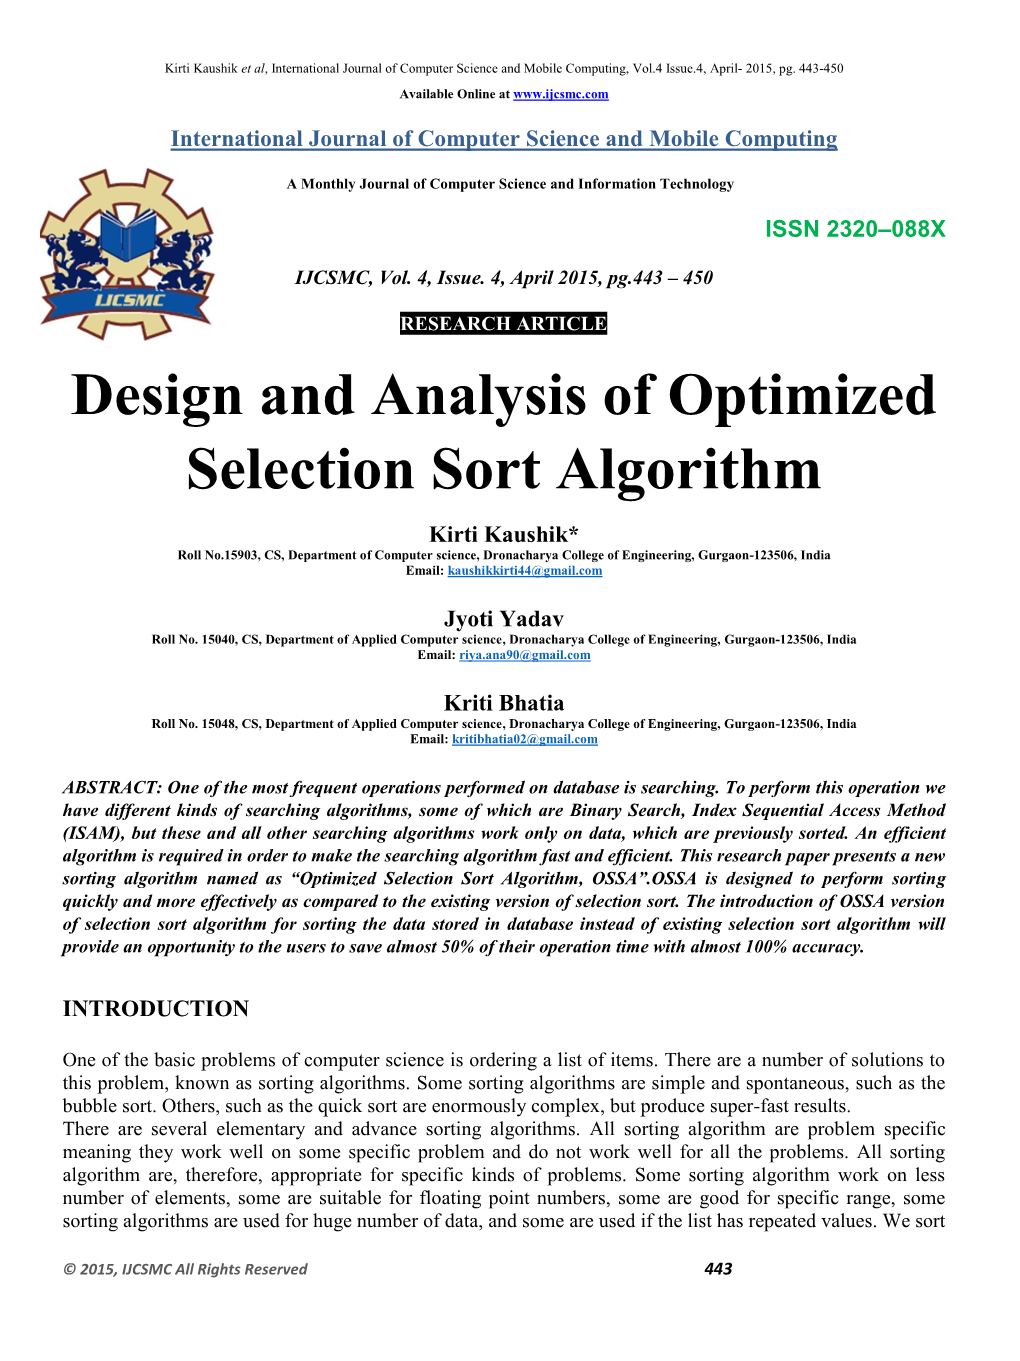 Design and Analysis of Optimized Selection Sort Algorithm